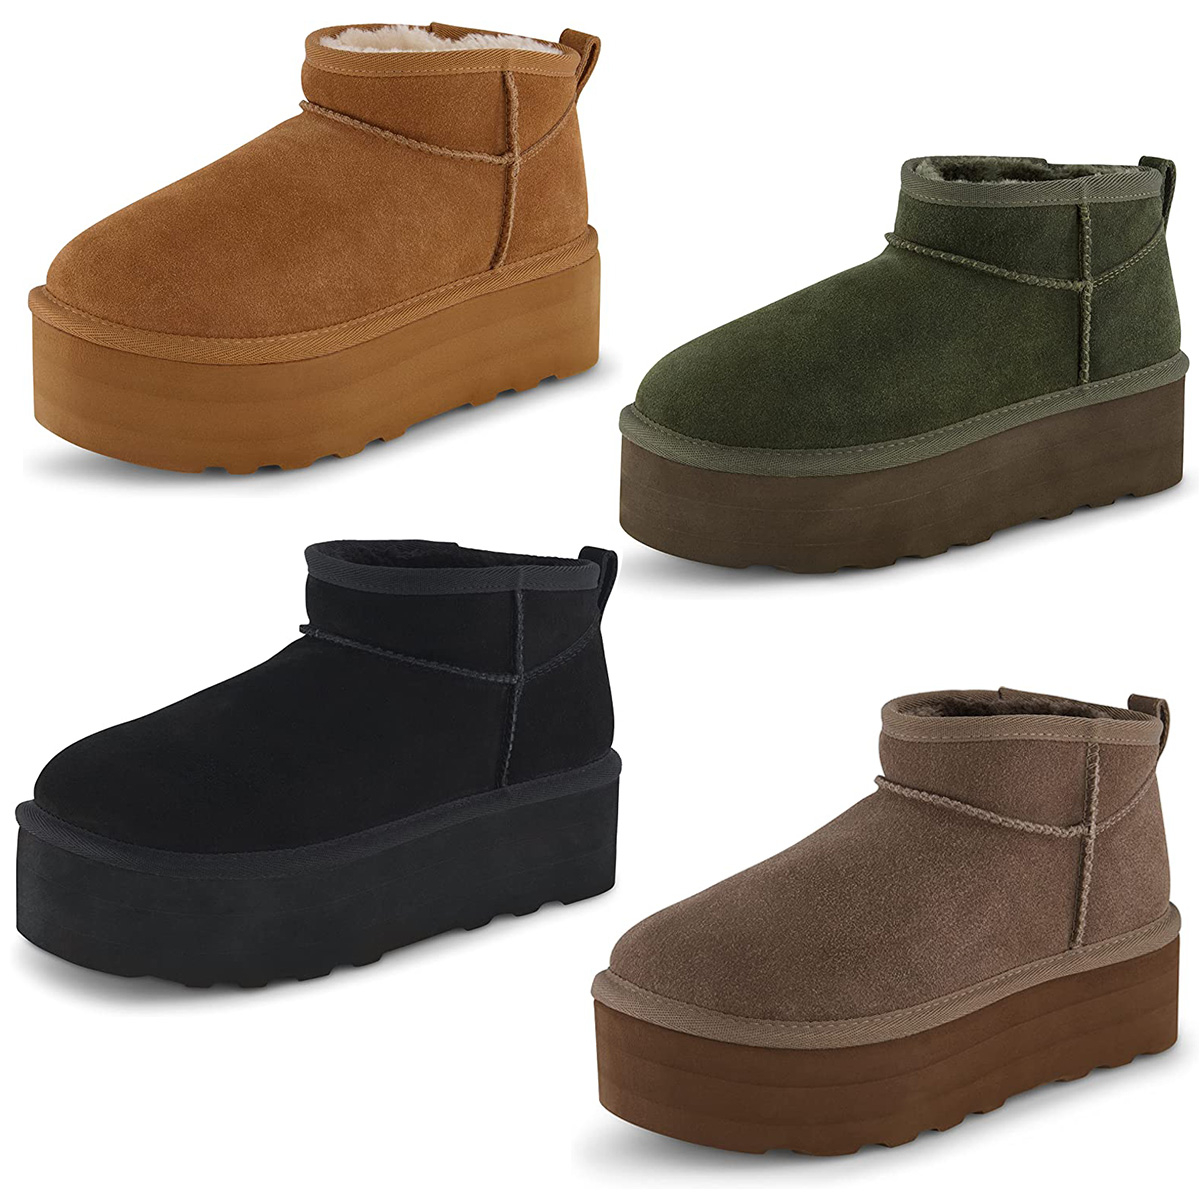 Best UGG Dupes + 3 Ultra Mini UGG Dupes To Try